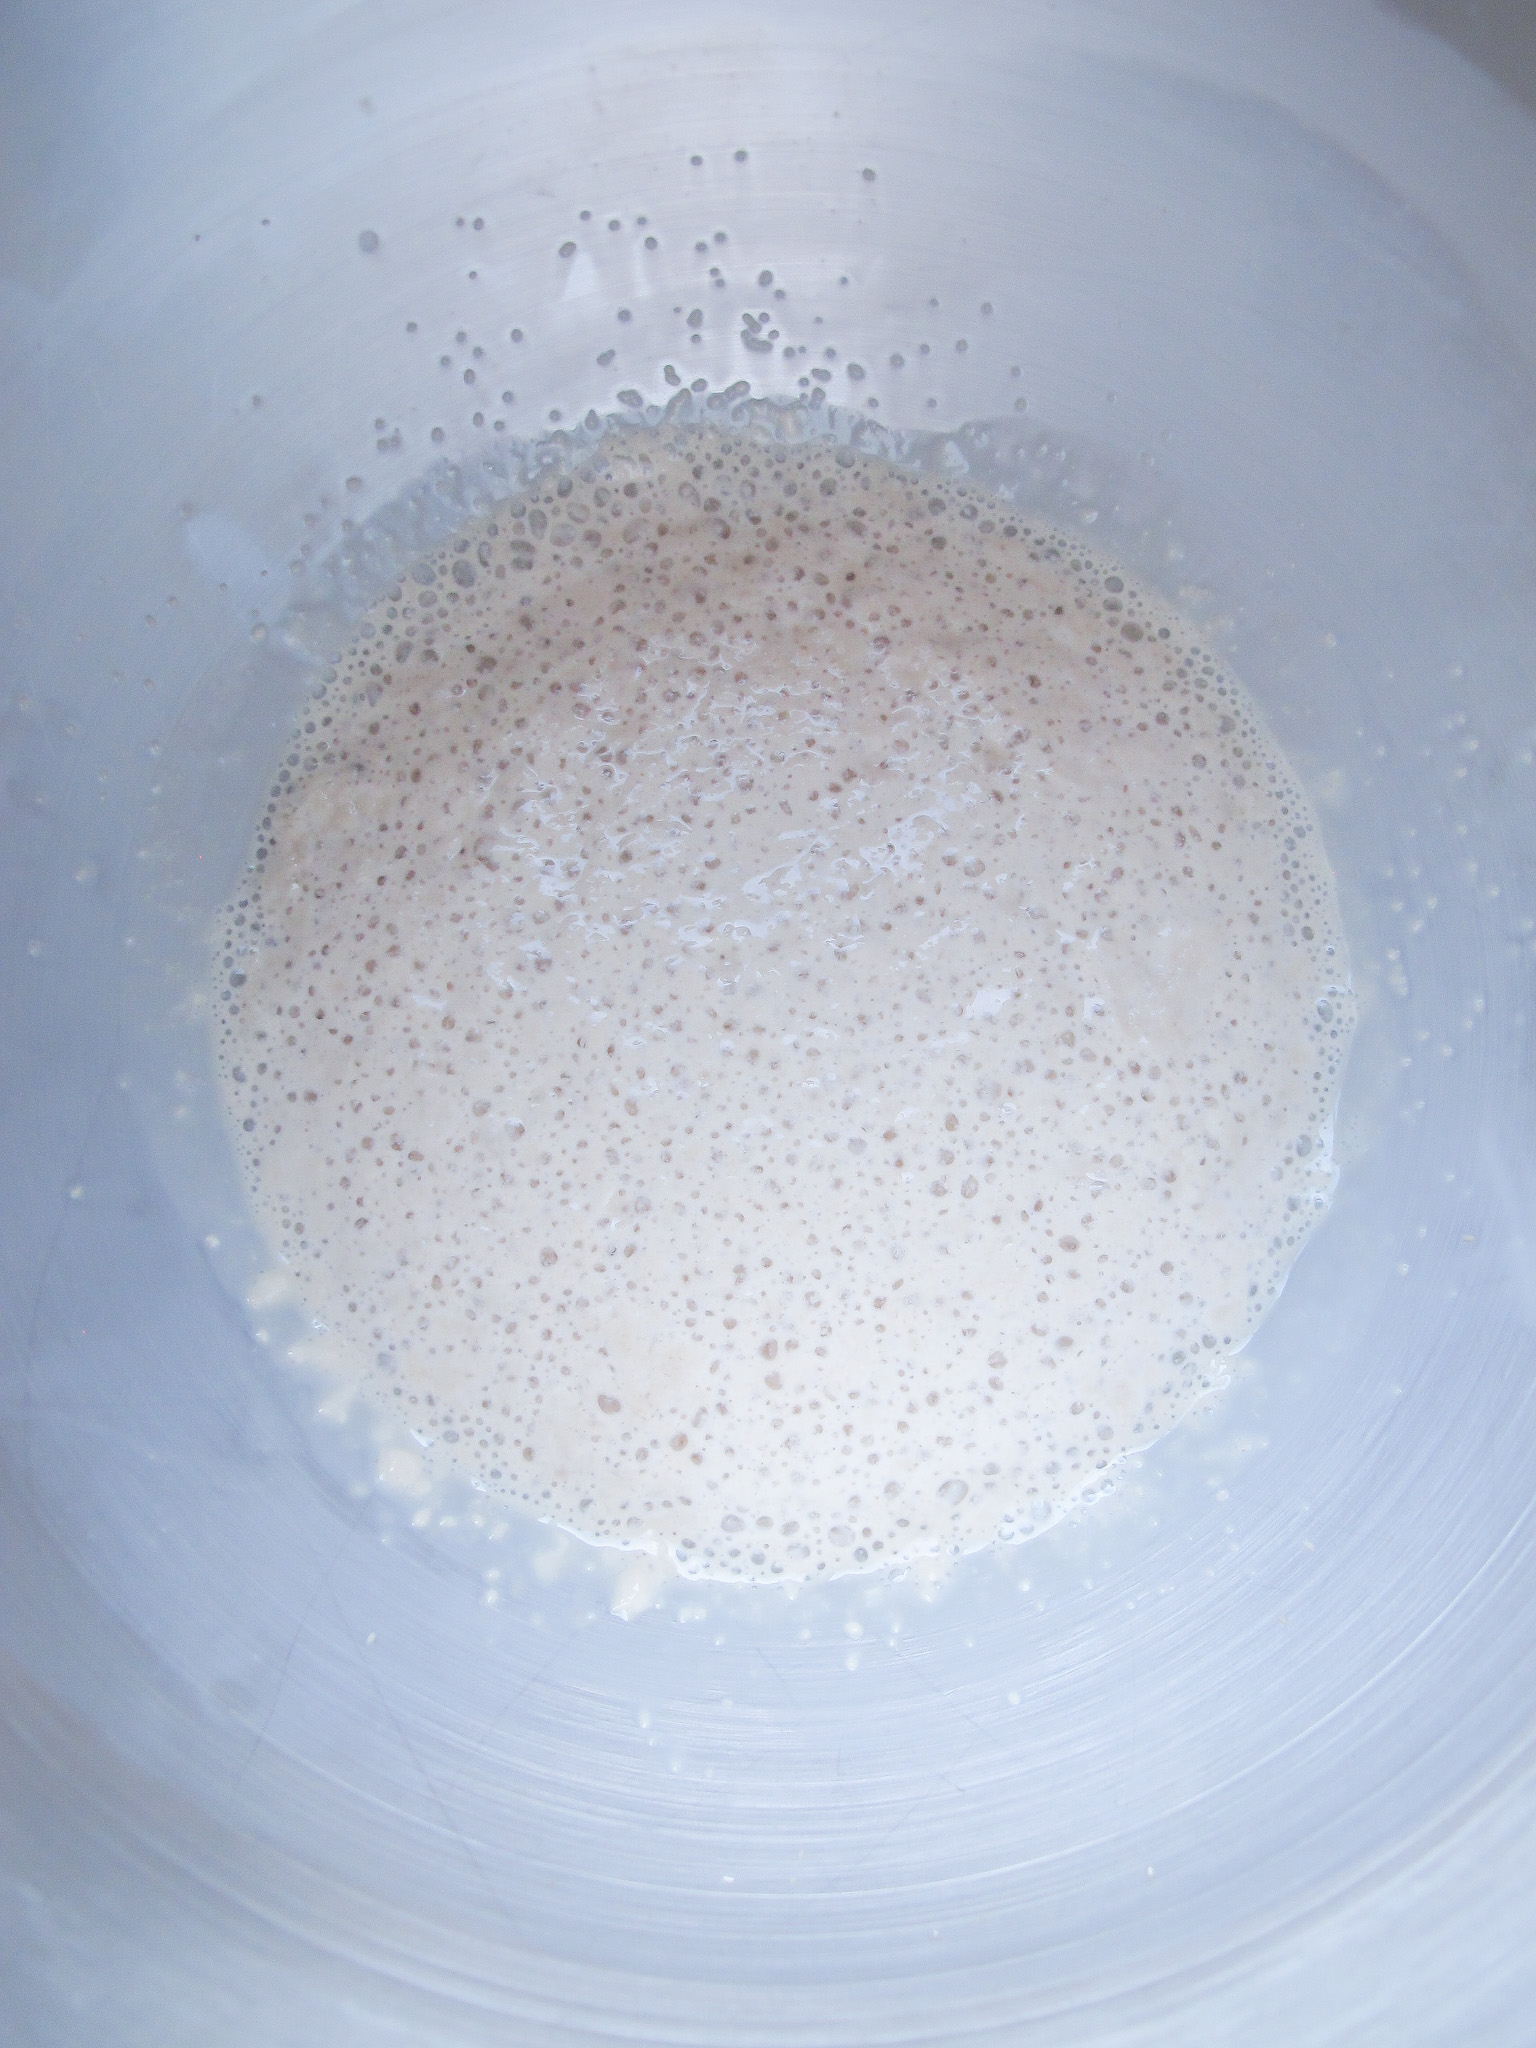 frothy yeast in a mixing bowl.